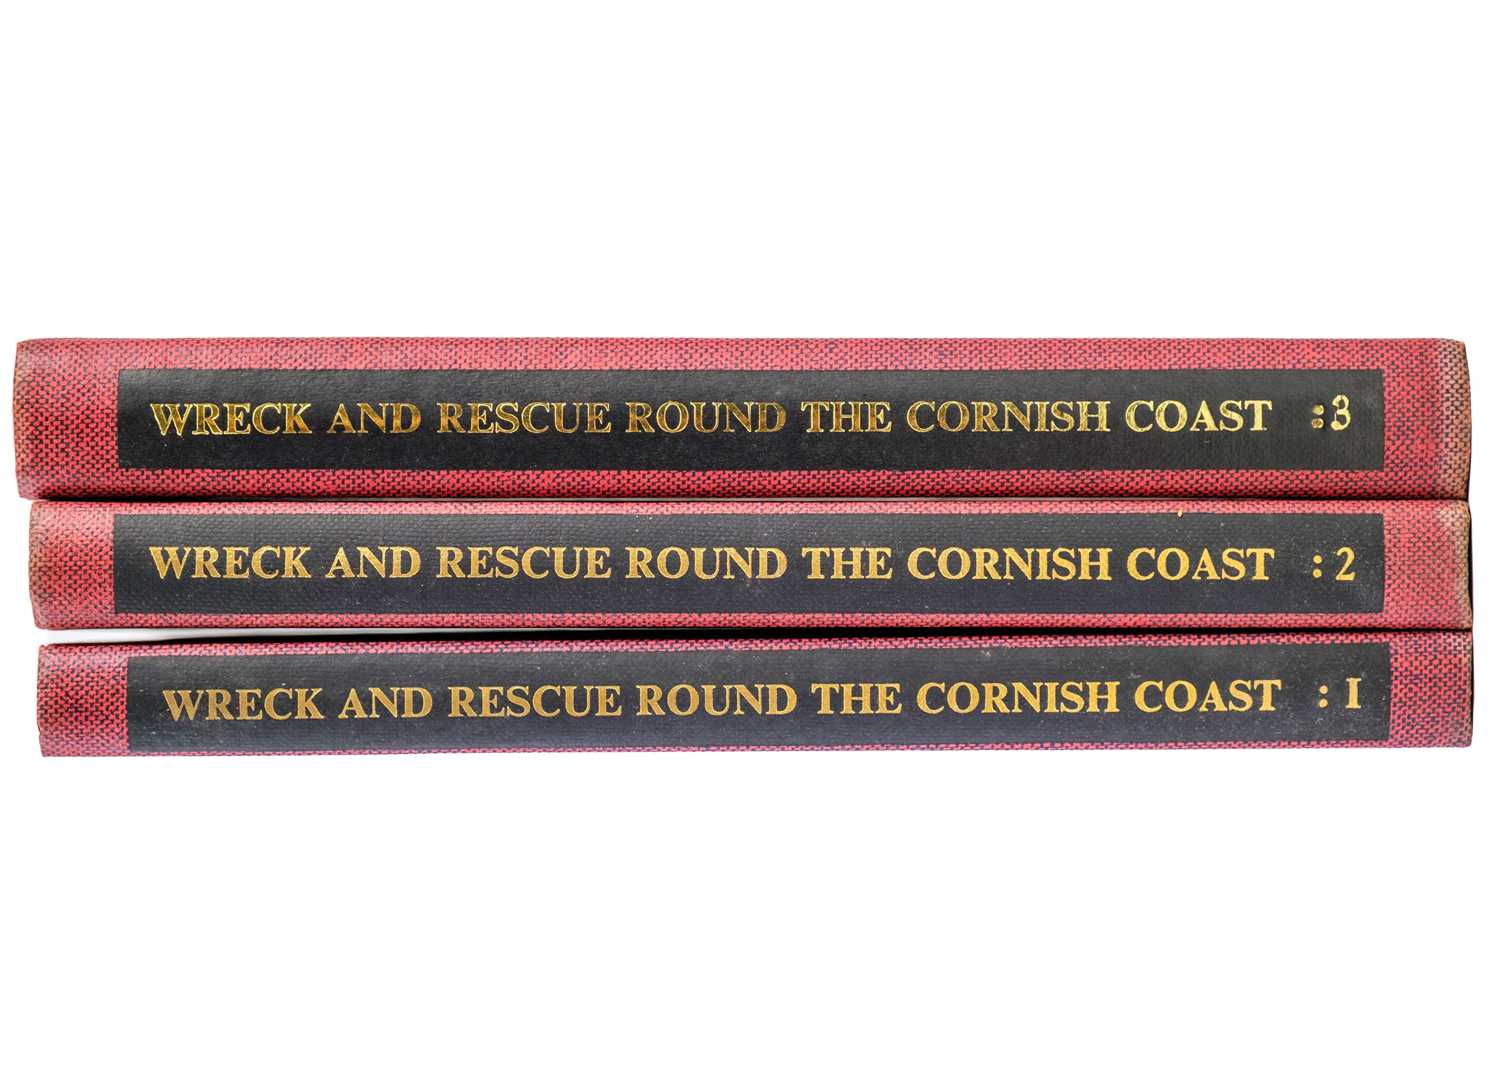 NOALL, Cyril and FARR, Grahame 'Wreck And Rescue Round The Cornish Coast', three book-set - Bild 9 aus 11